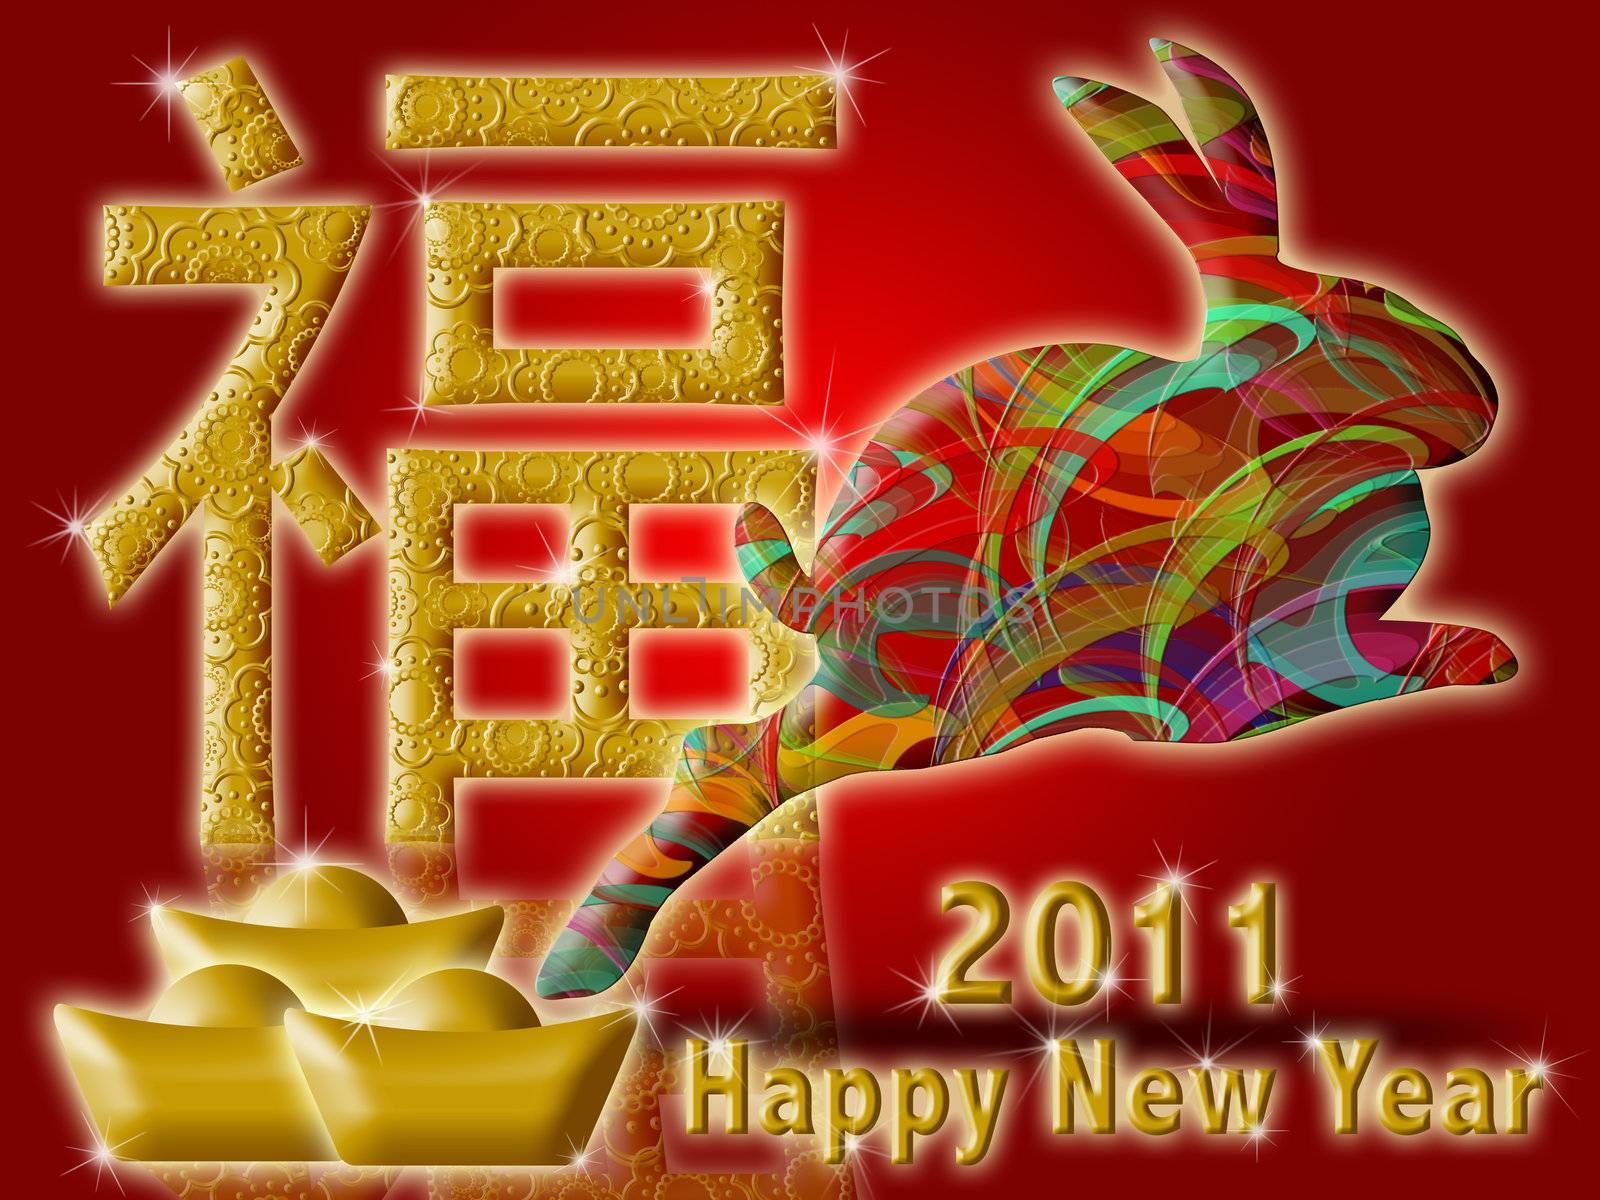 Happy Chinese New Year 2011 with Colorful Rabbit and Prosperity Symbol Illustration on Red